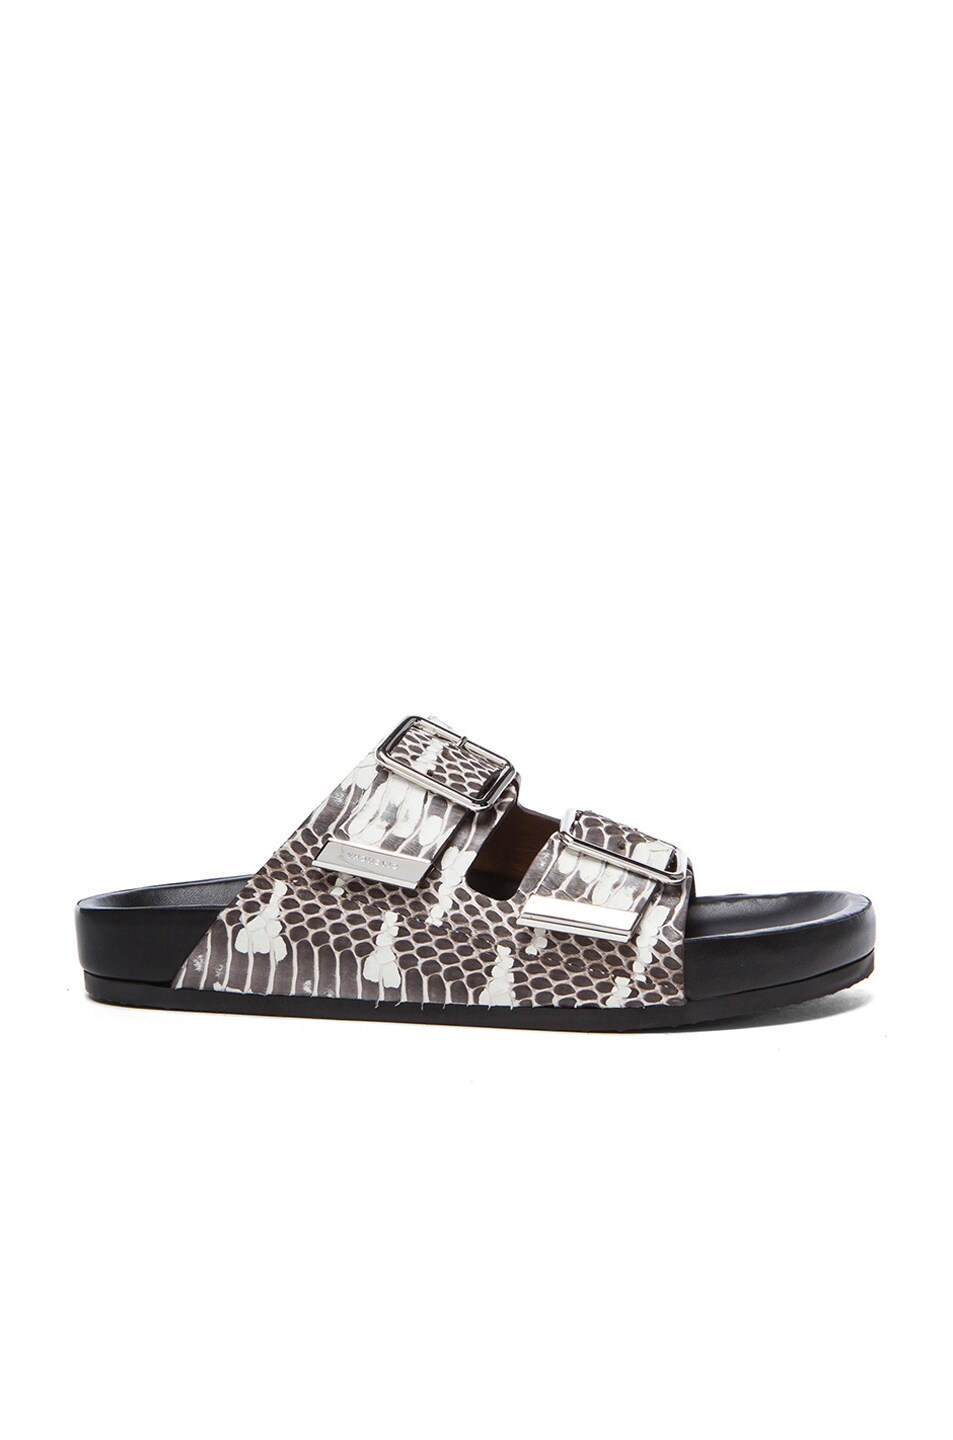 Givenchy Barka Casual Snakeskin Embossed Leather Sandals in Natural | FWRD